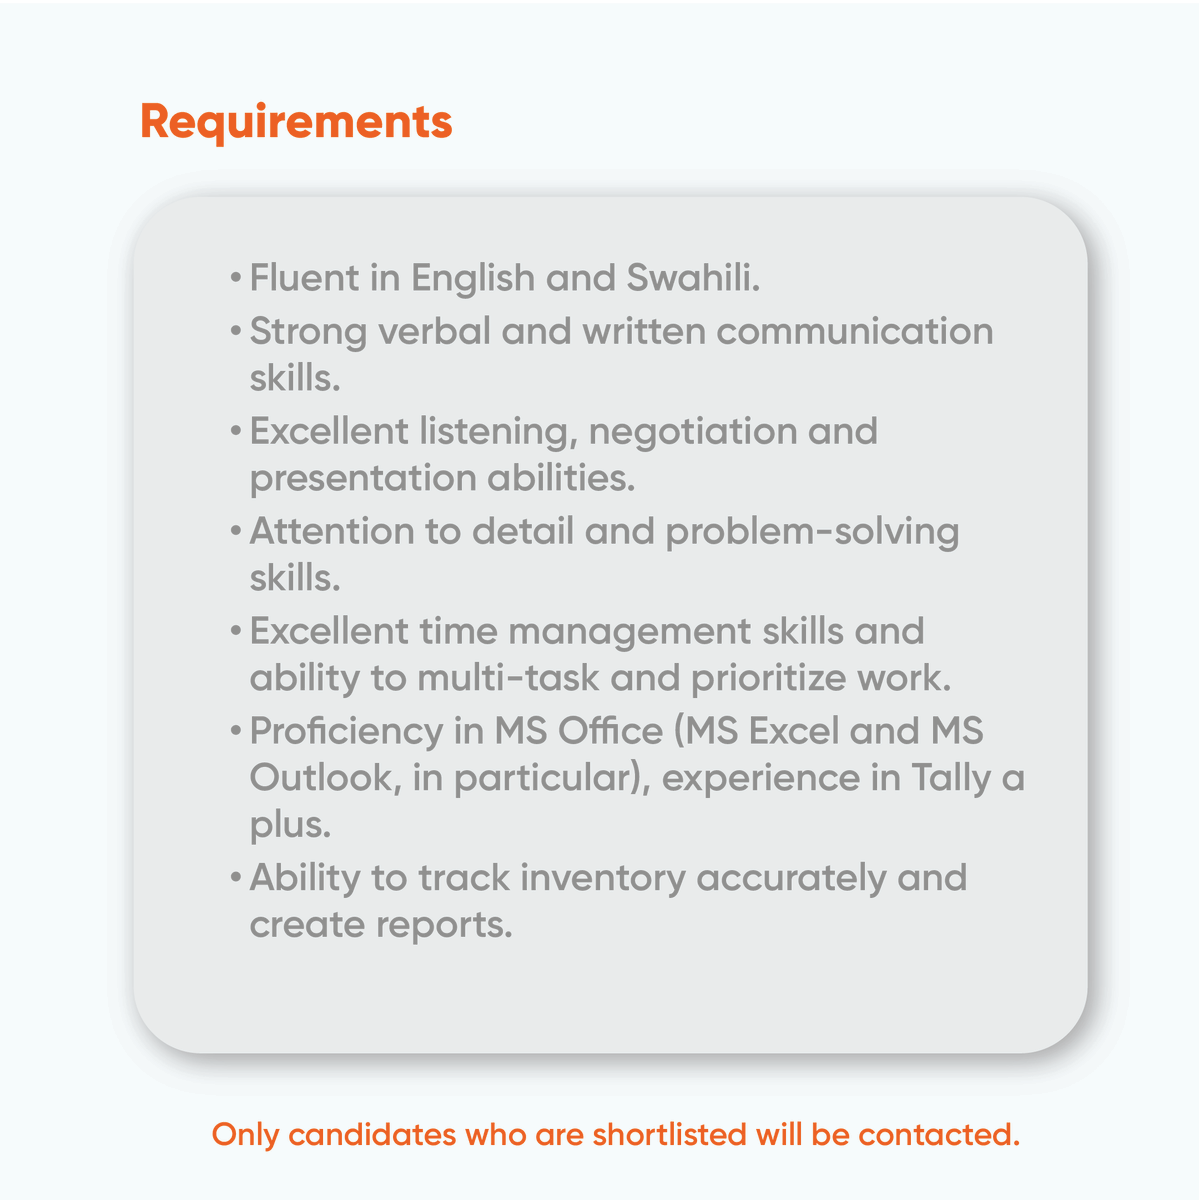 To be considered for the job, please apply by sending your application to jobs@shugulika.com.

Please note that only candidates who are shortlisted will be contacted.

#OperationsManagement #SupervisorJobs #ManagementJobs #OperationsRole #JobOpening  #OperationsCareer